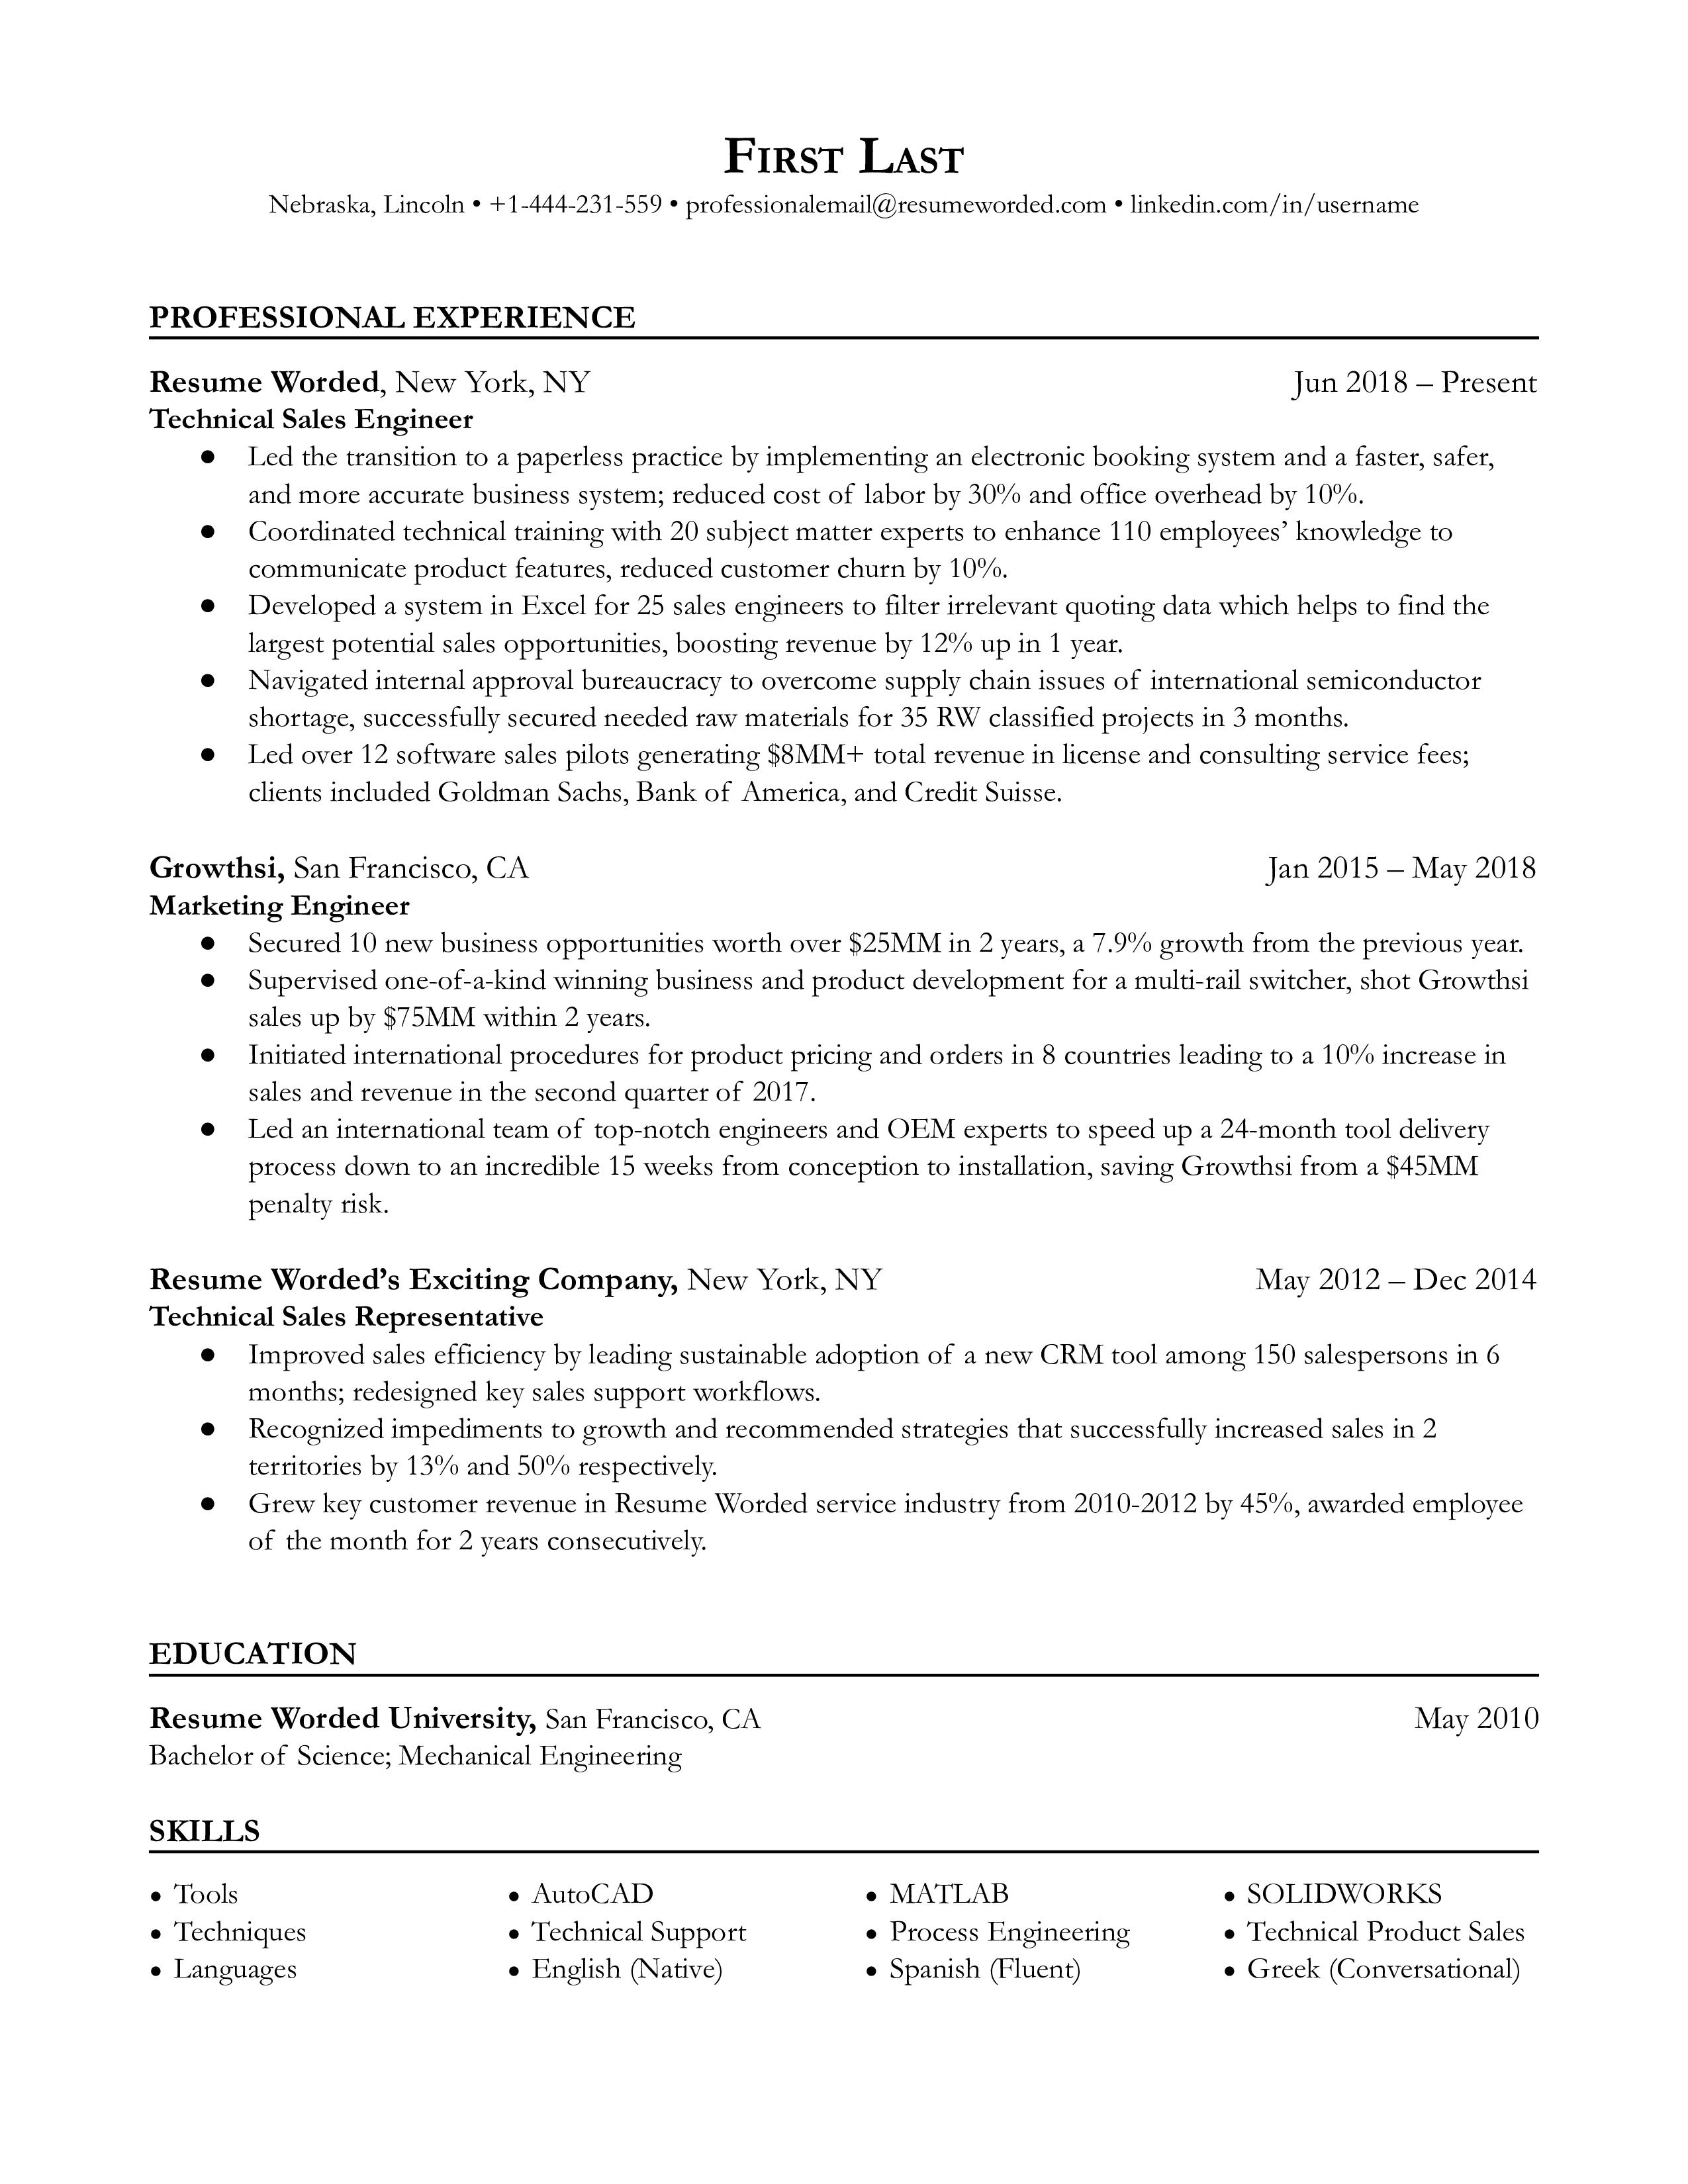 A resume for a technical sales engineer that highlights their experience in managing technical sales.